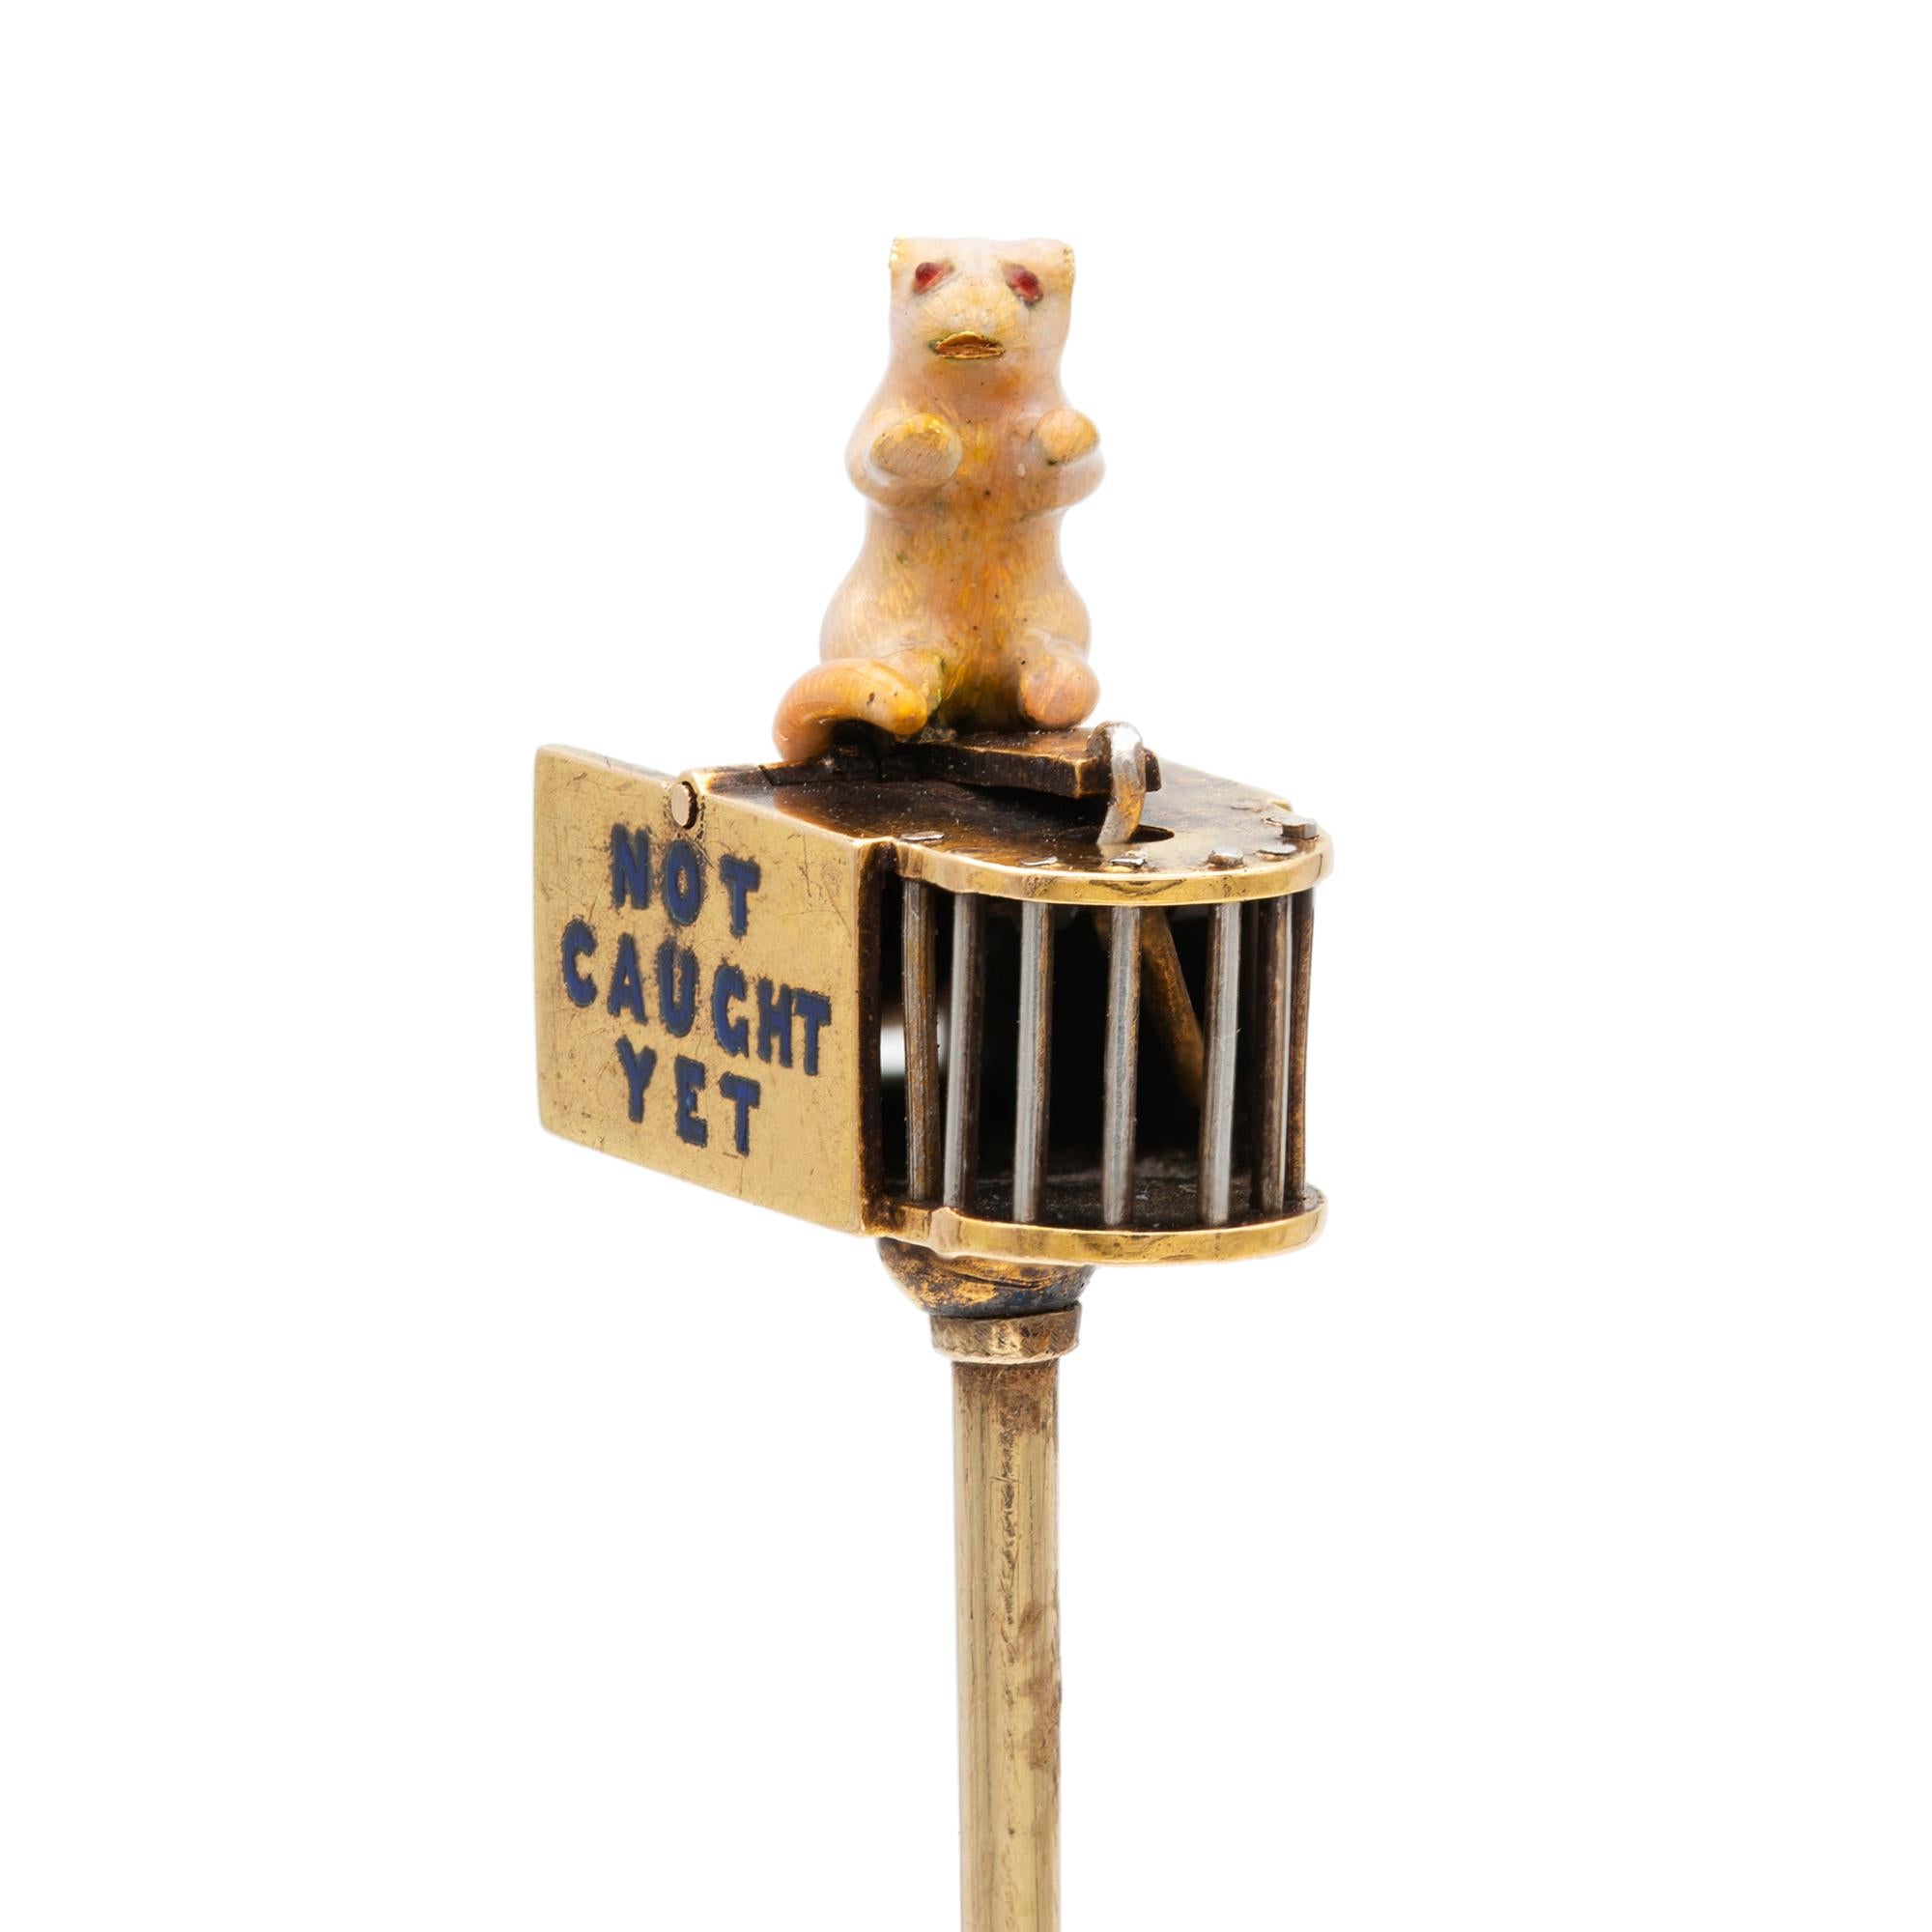 A turn of the 20th century mouse and trap stick-pin, the fine enamelled mouse sitting on the top of a trap with blue enamel inscription “not caught yet”, all made in yellow gold, with gold pin, circa 1900, the jewelled part measuring 1.5x1.9cm gross